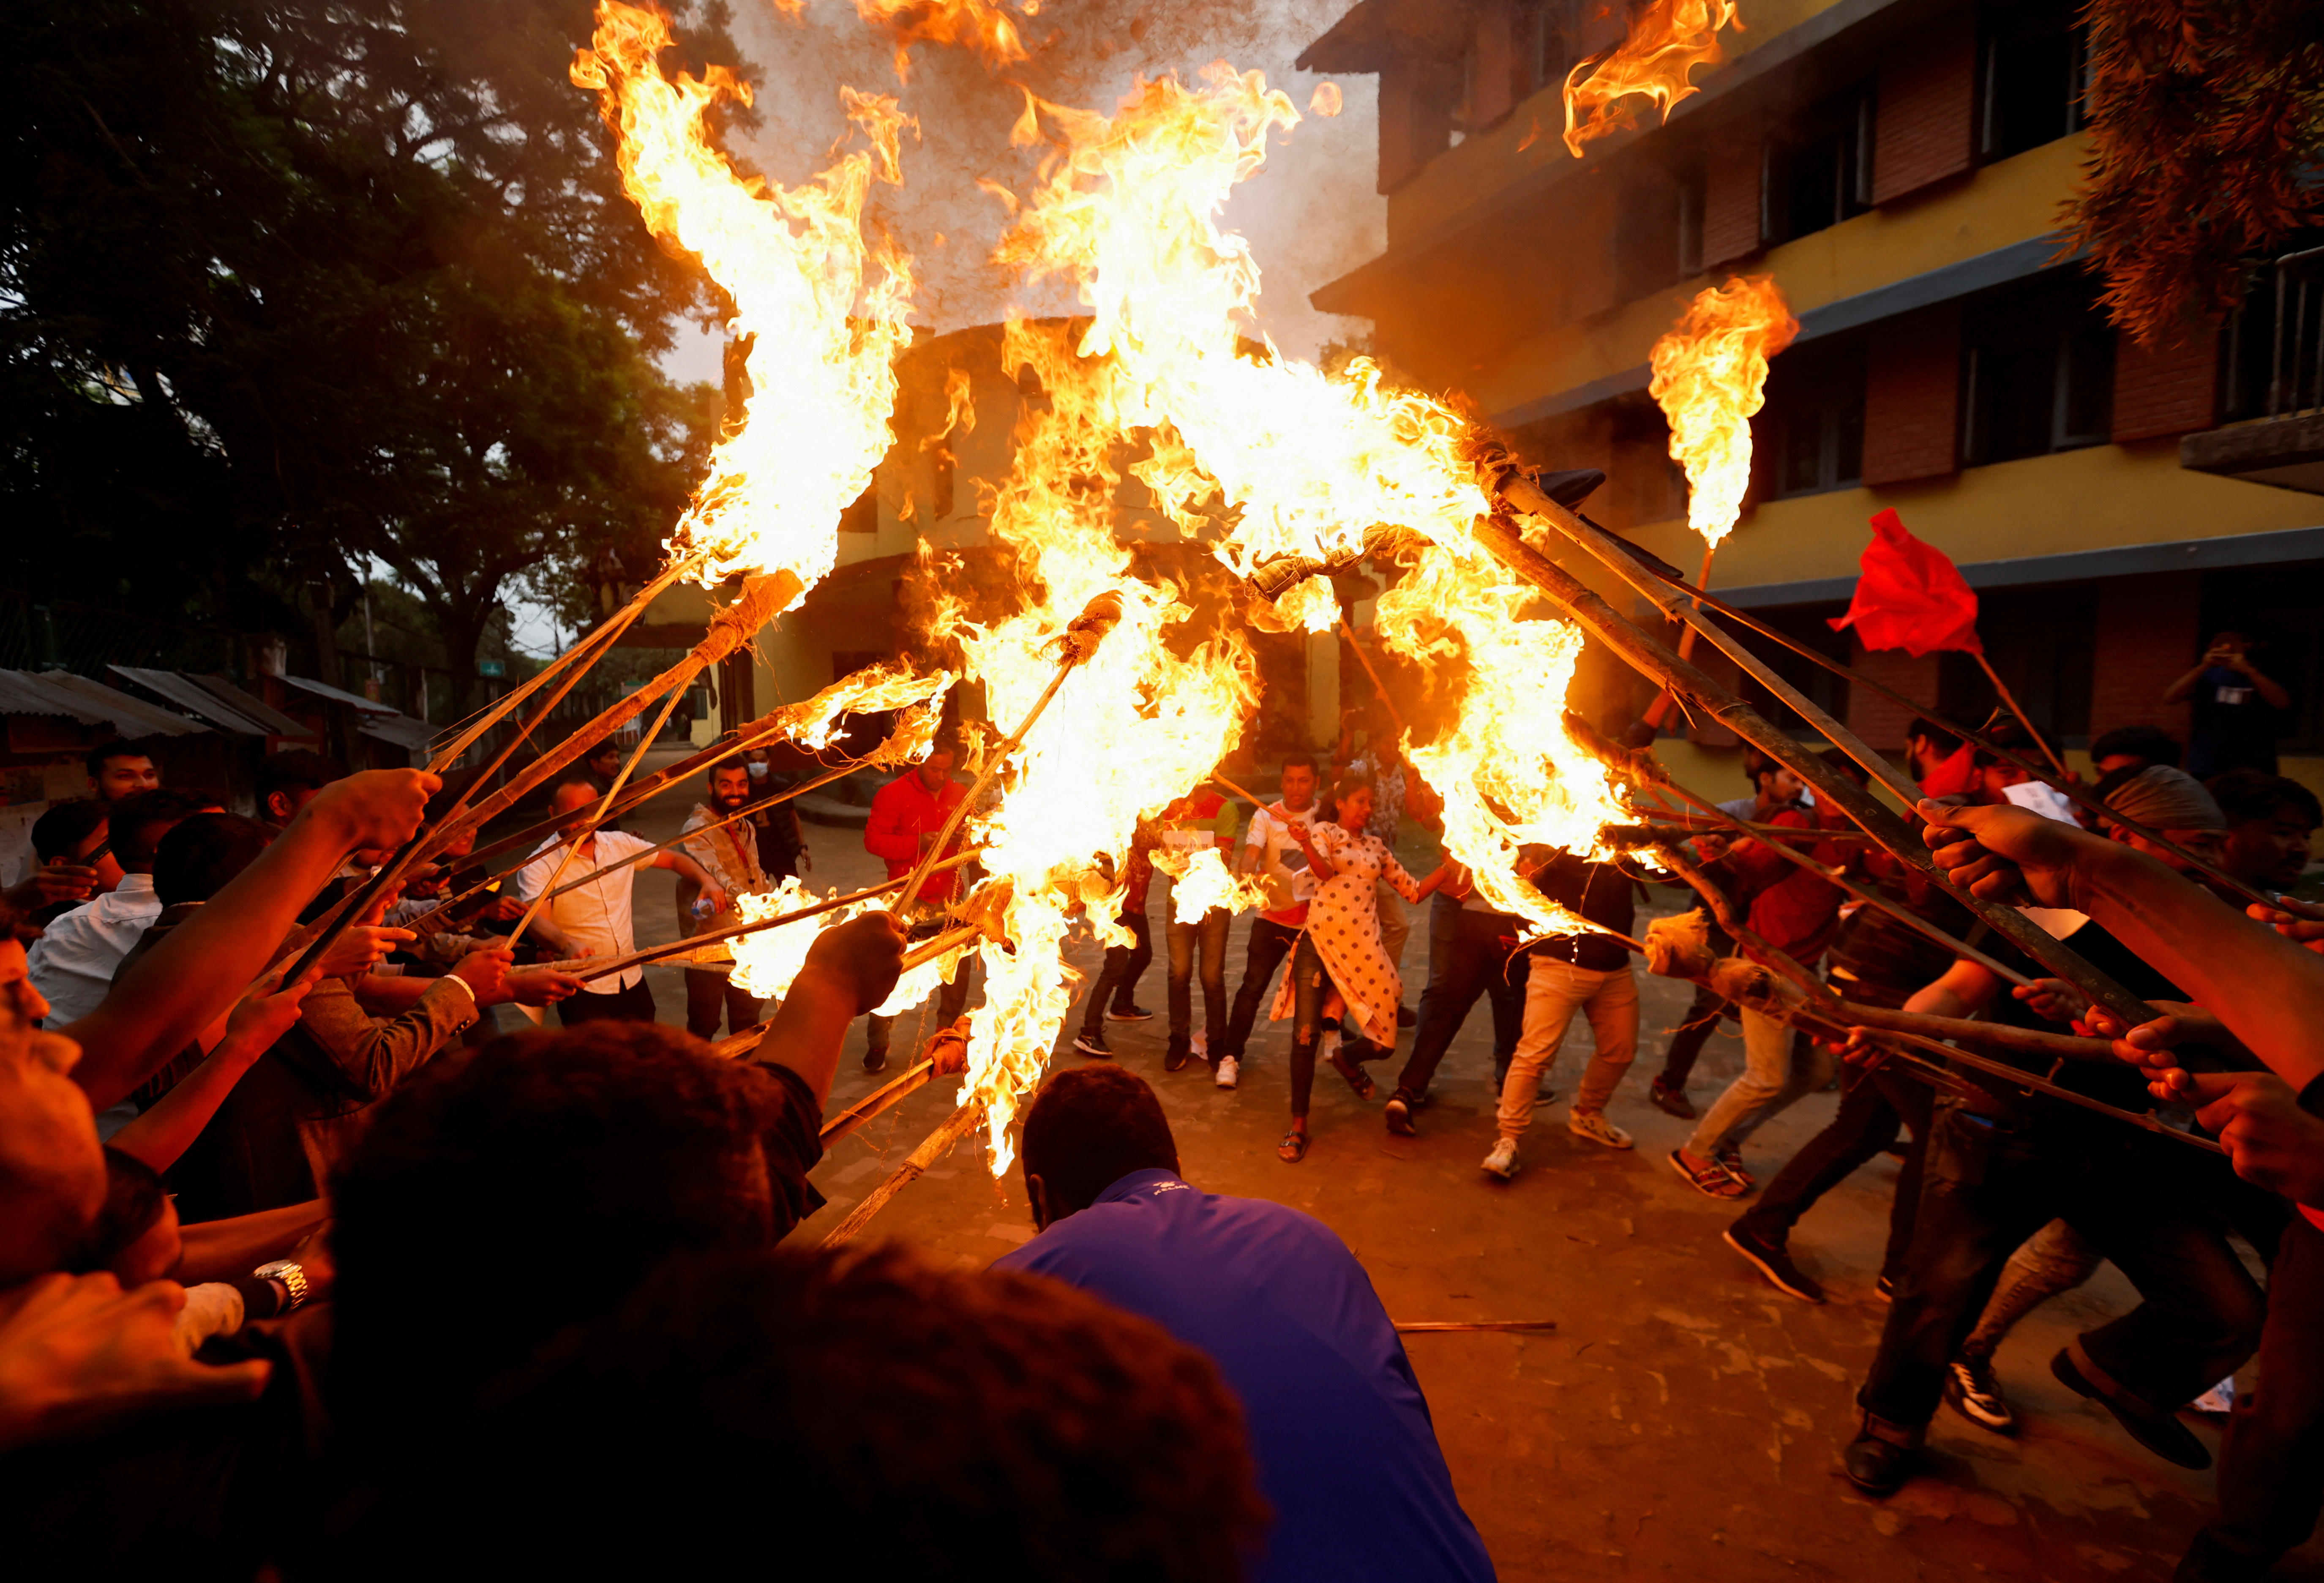 Students affiliated with the main opposition party take part in a protest against the rise in fuel prices in Kathmandu